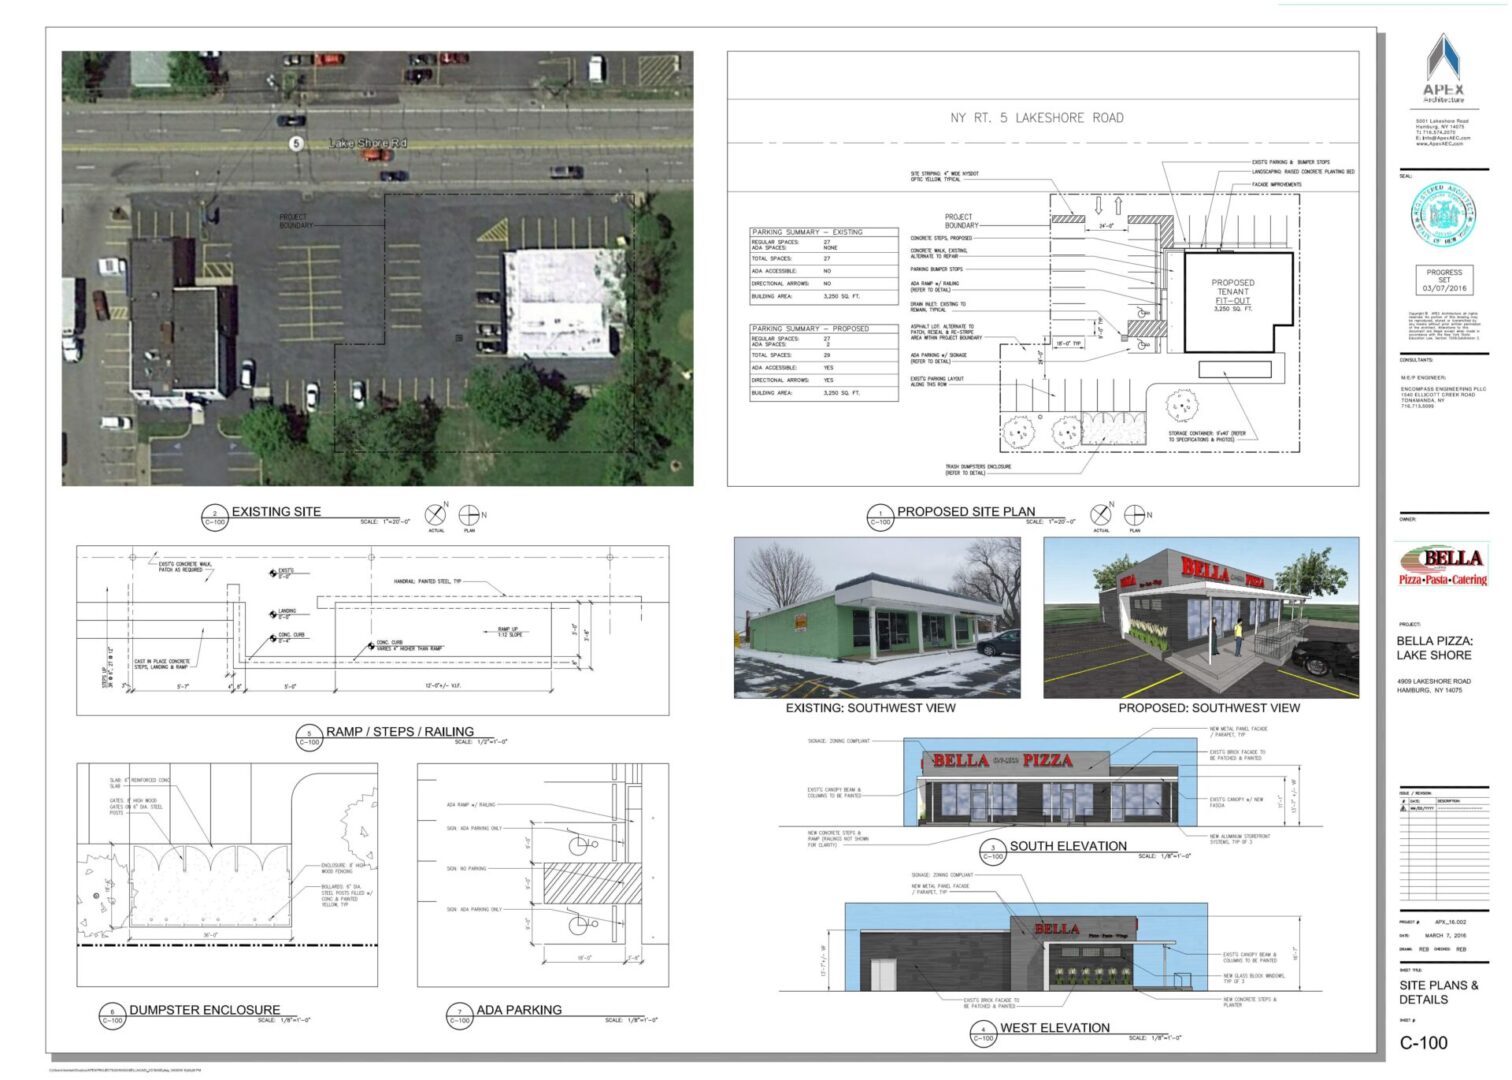 Site development plans and architectural drawings for a commercial building renovation.